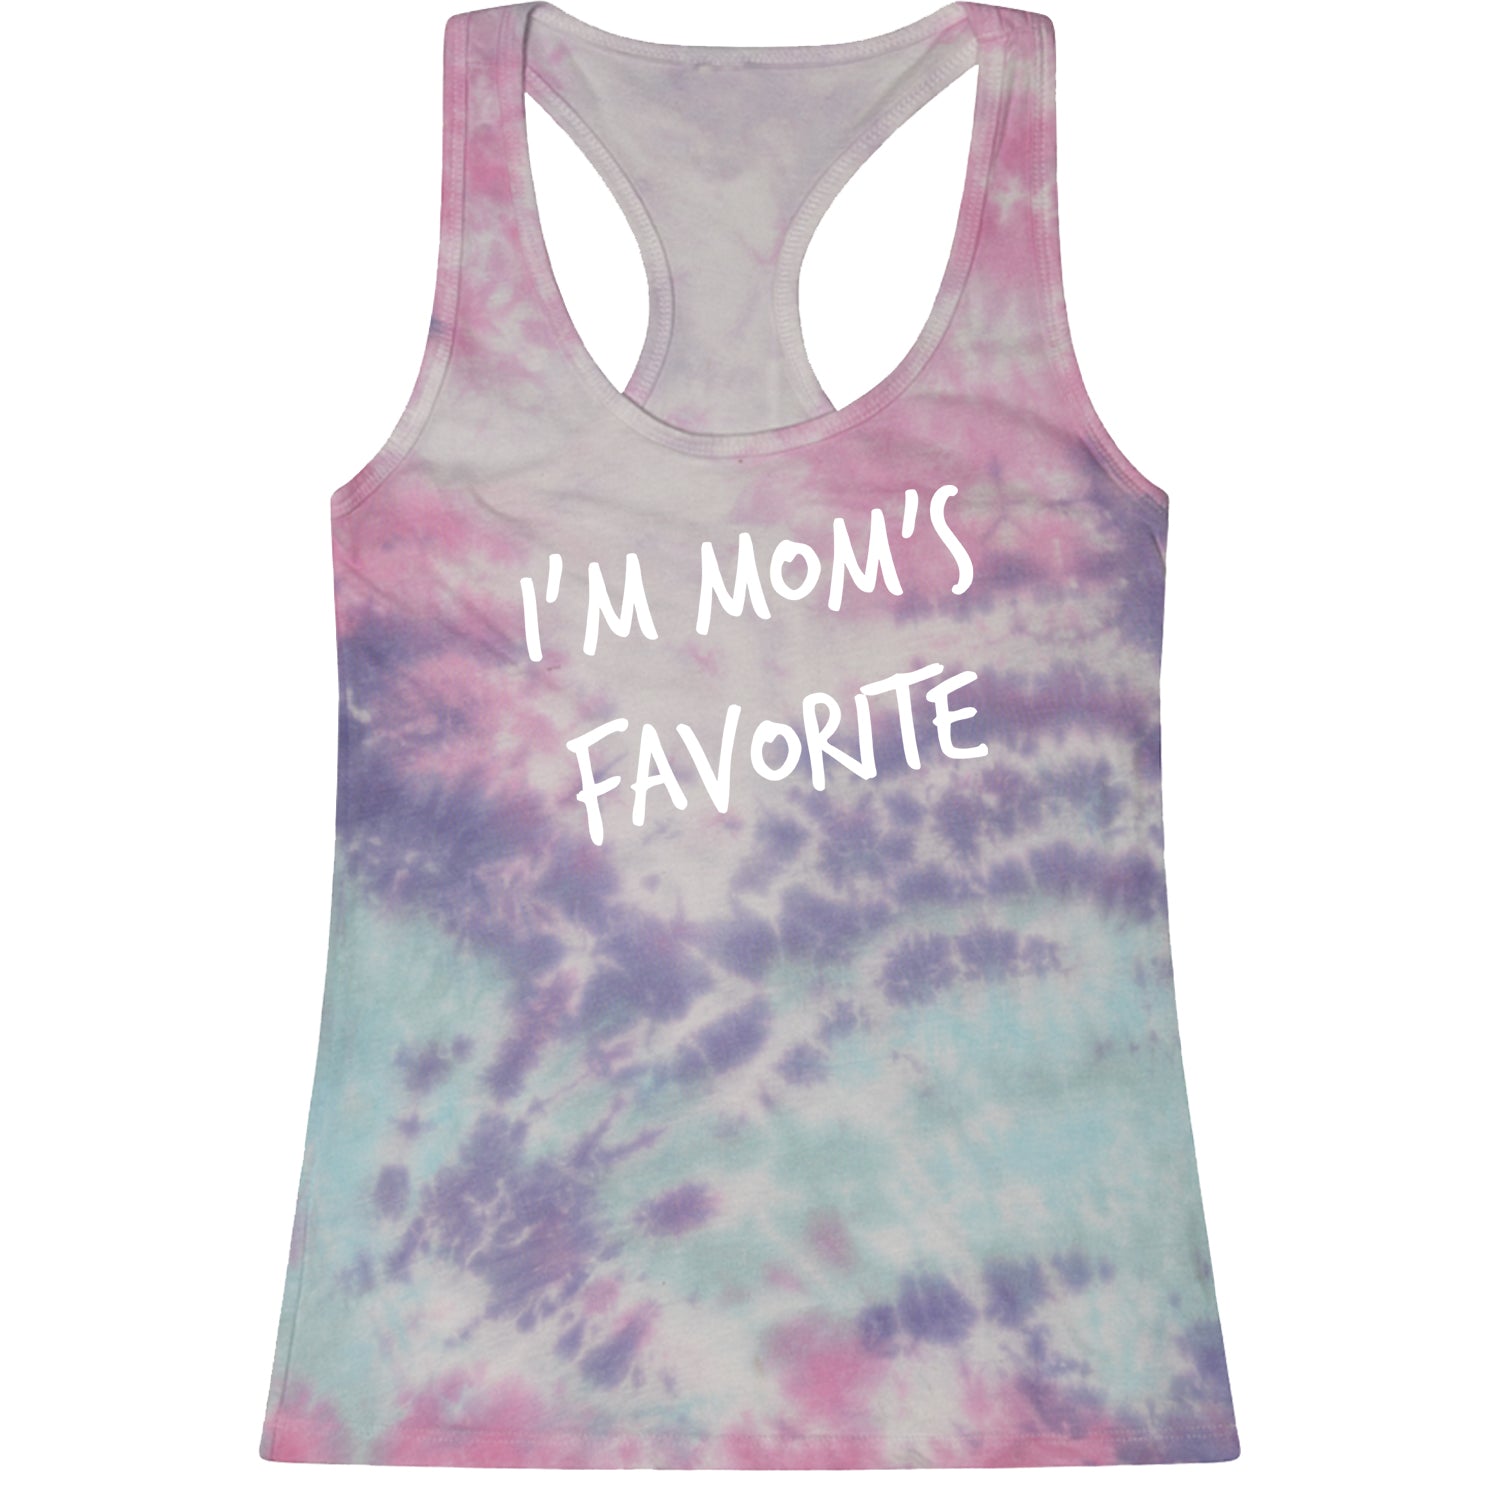 I'm Mom's Favorite Racerback Tank Top for Women bear, buck, mama, papa by Expression Tees